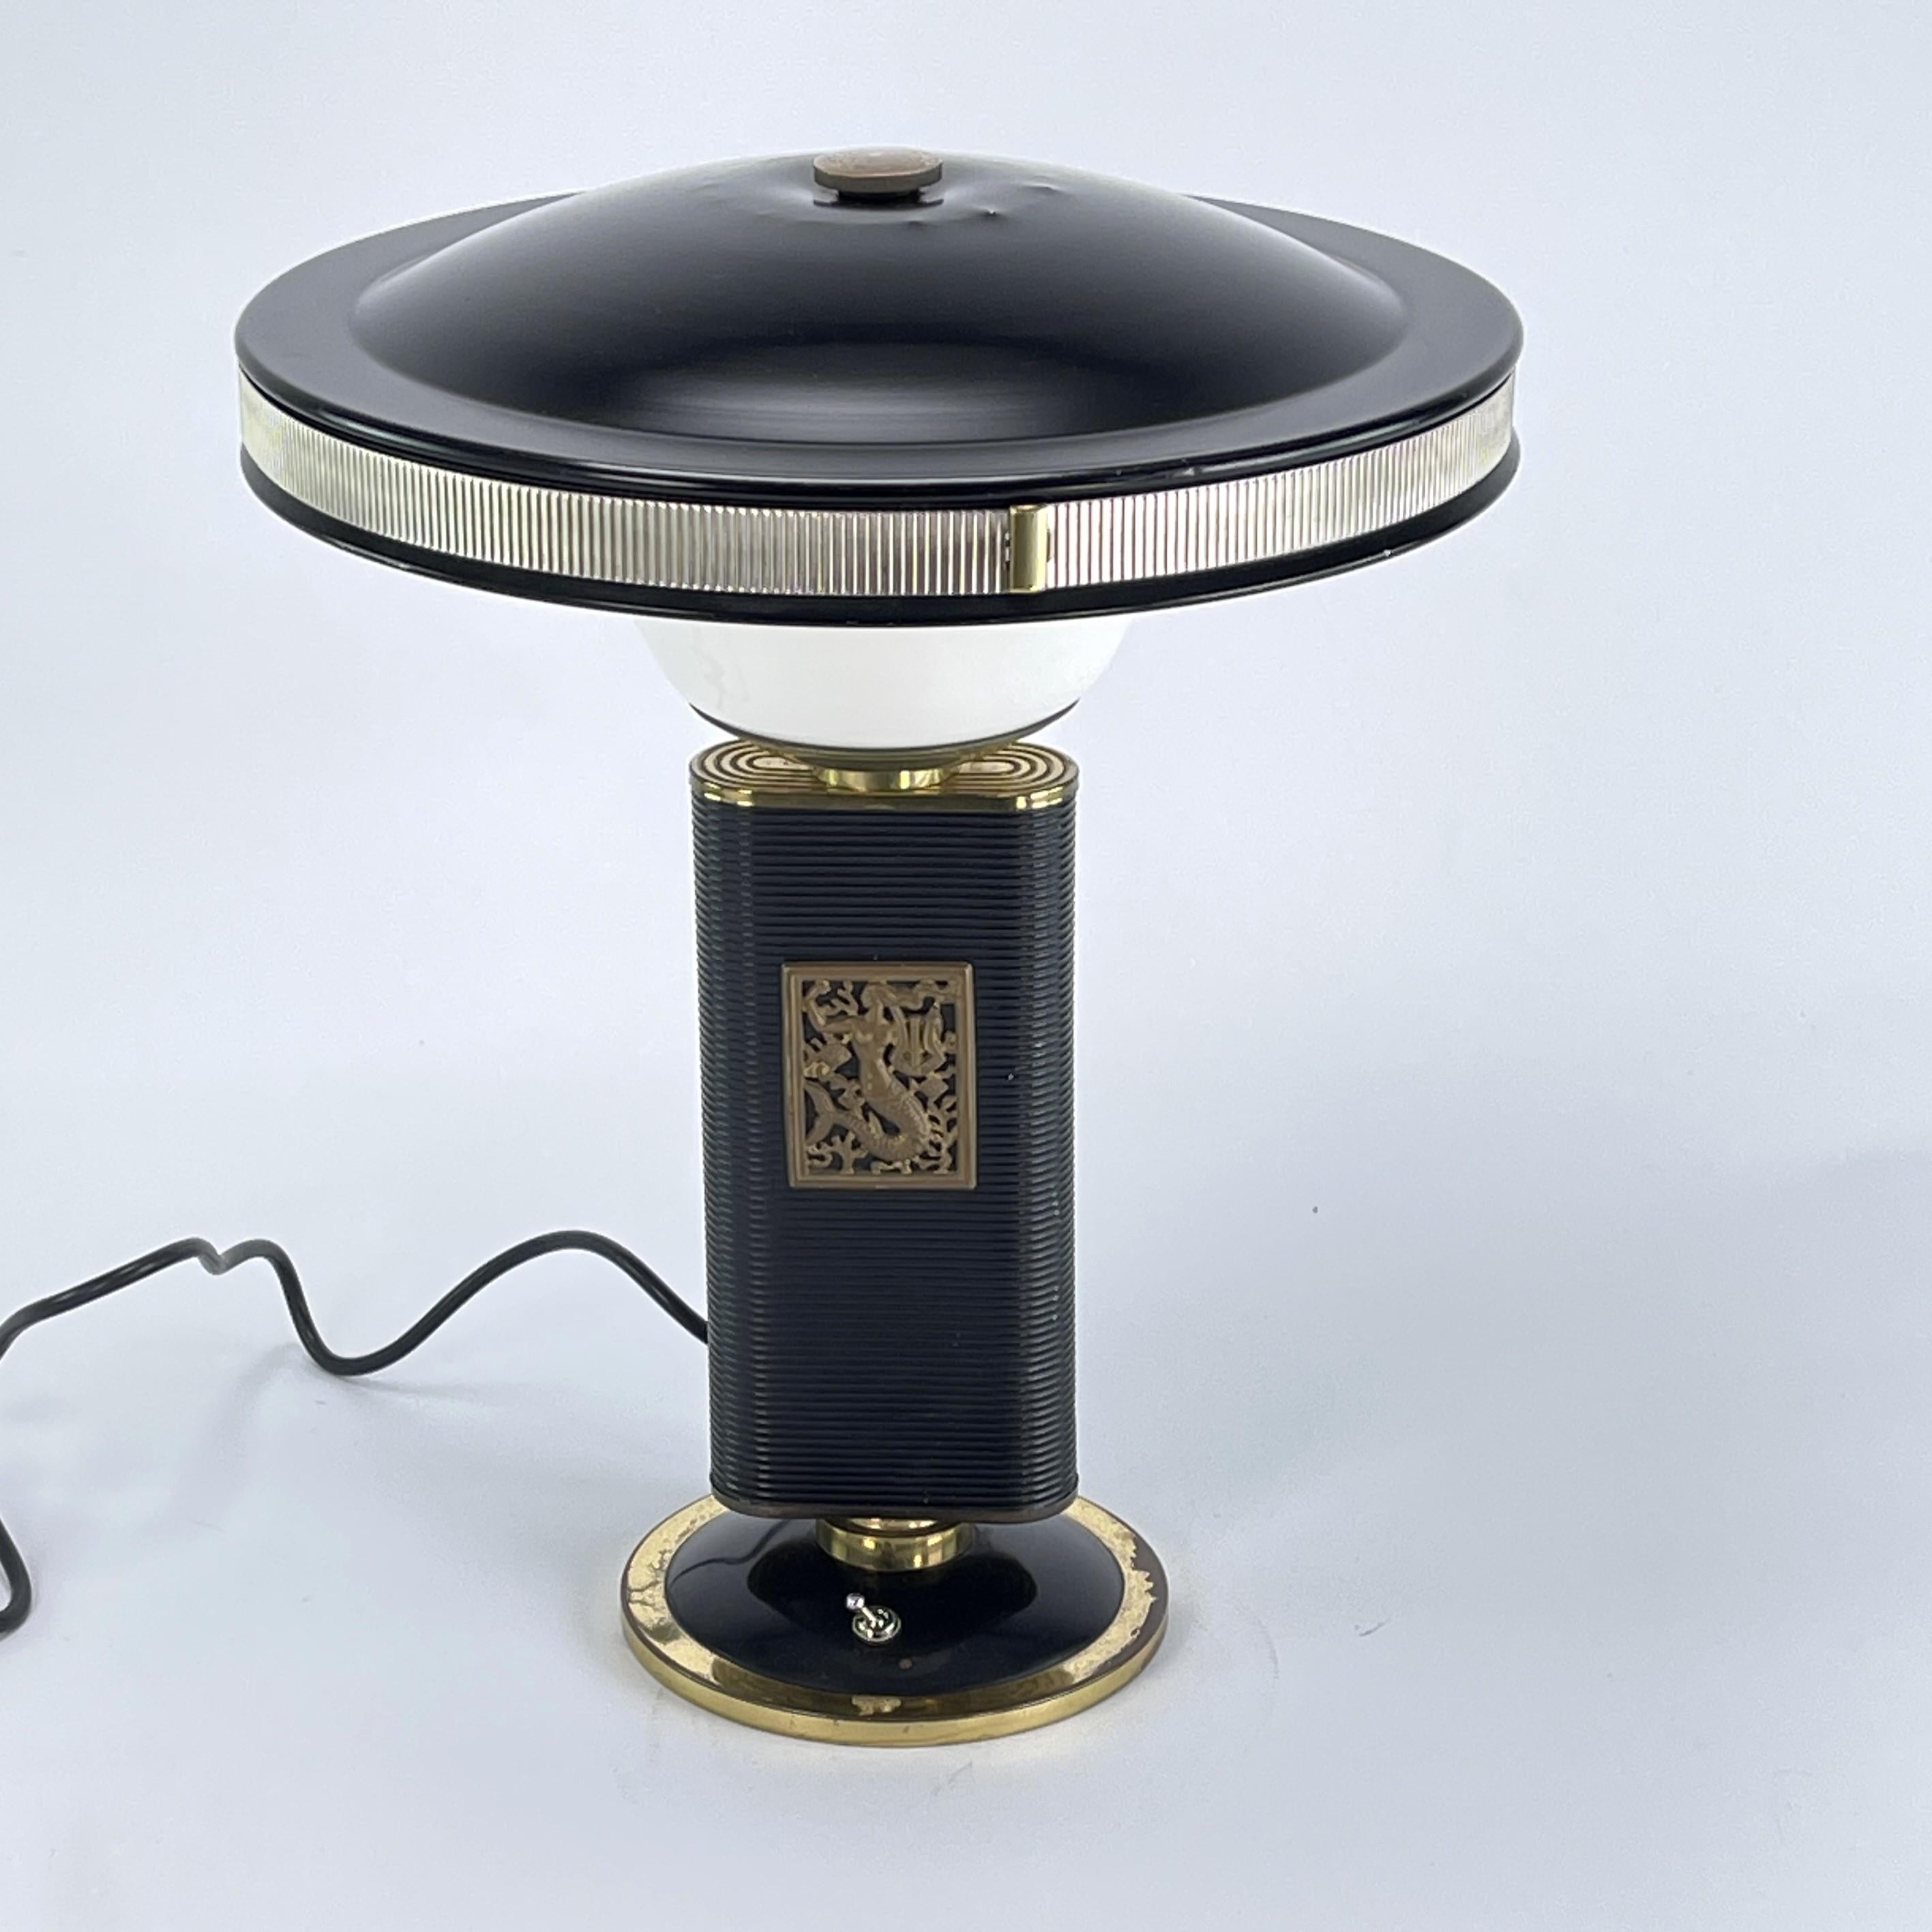 Art Deco table lamp from Eileen Gray - Siren

This stunning Art Deco lamp from the 1950s is an outstanding example of the elegance and sophistication of the Art Deco style. With its combination of brass and plastic, this table lamp embodies the